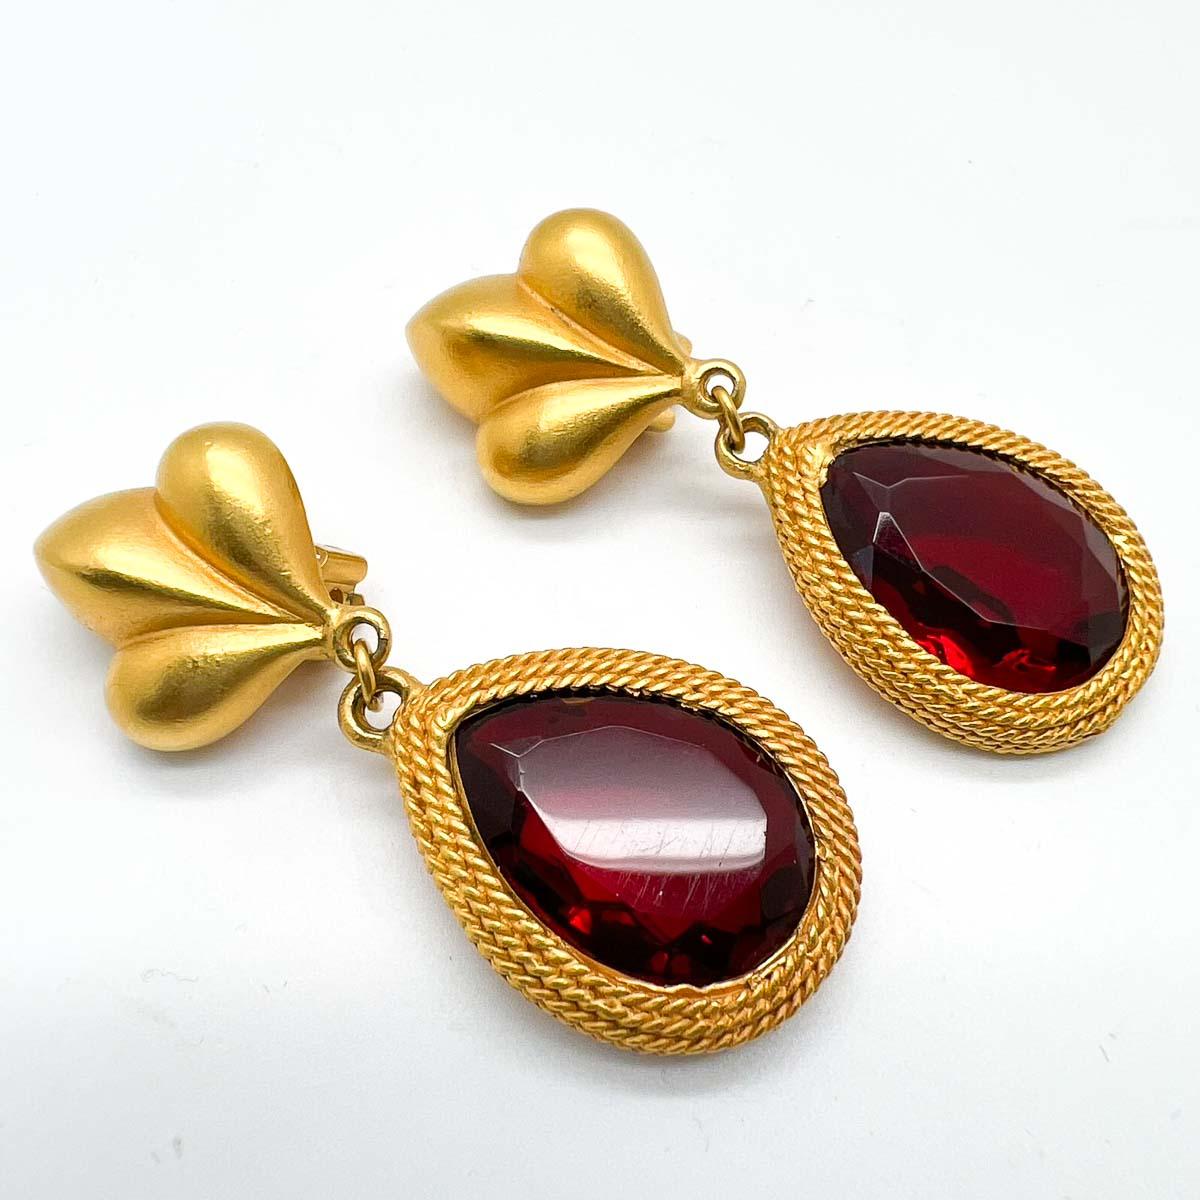 A divine pair of vintage Maxine Denker Ruby Earrings. The brushed gold setting proving a magnificent backdrop for the huge ruby crystal, fancy cut teardrop stone. A vibrant and eternally elegant statement earring from this wonderful New York City